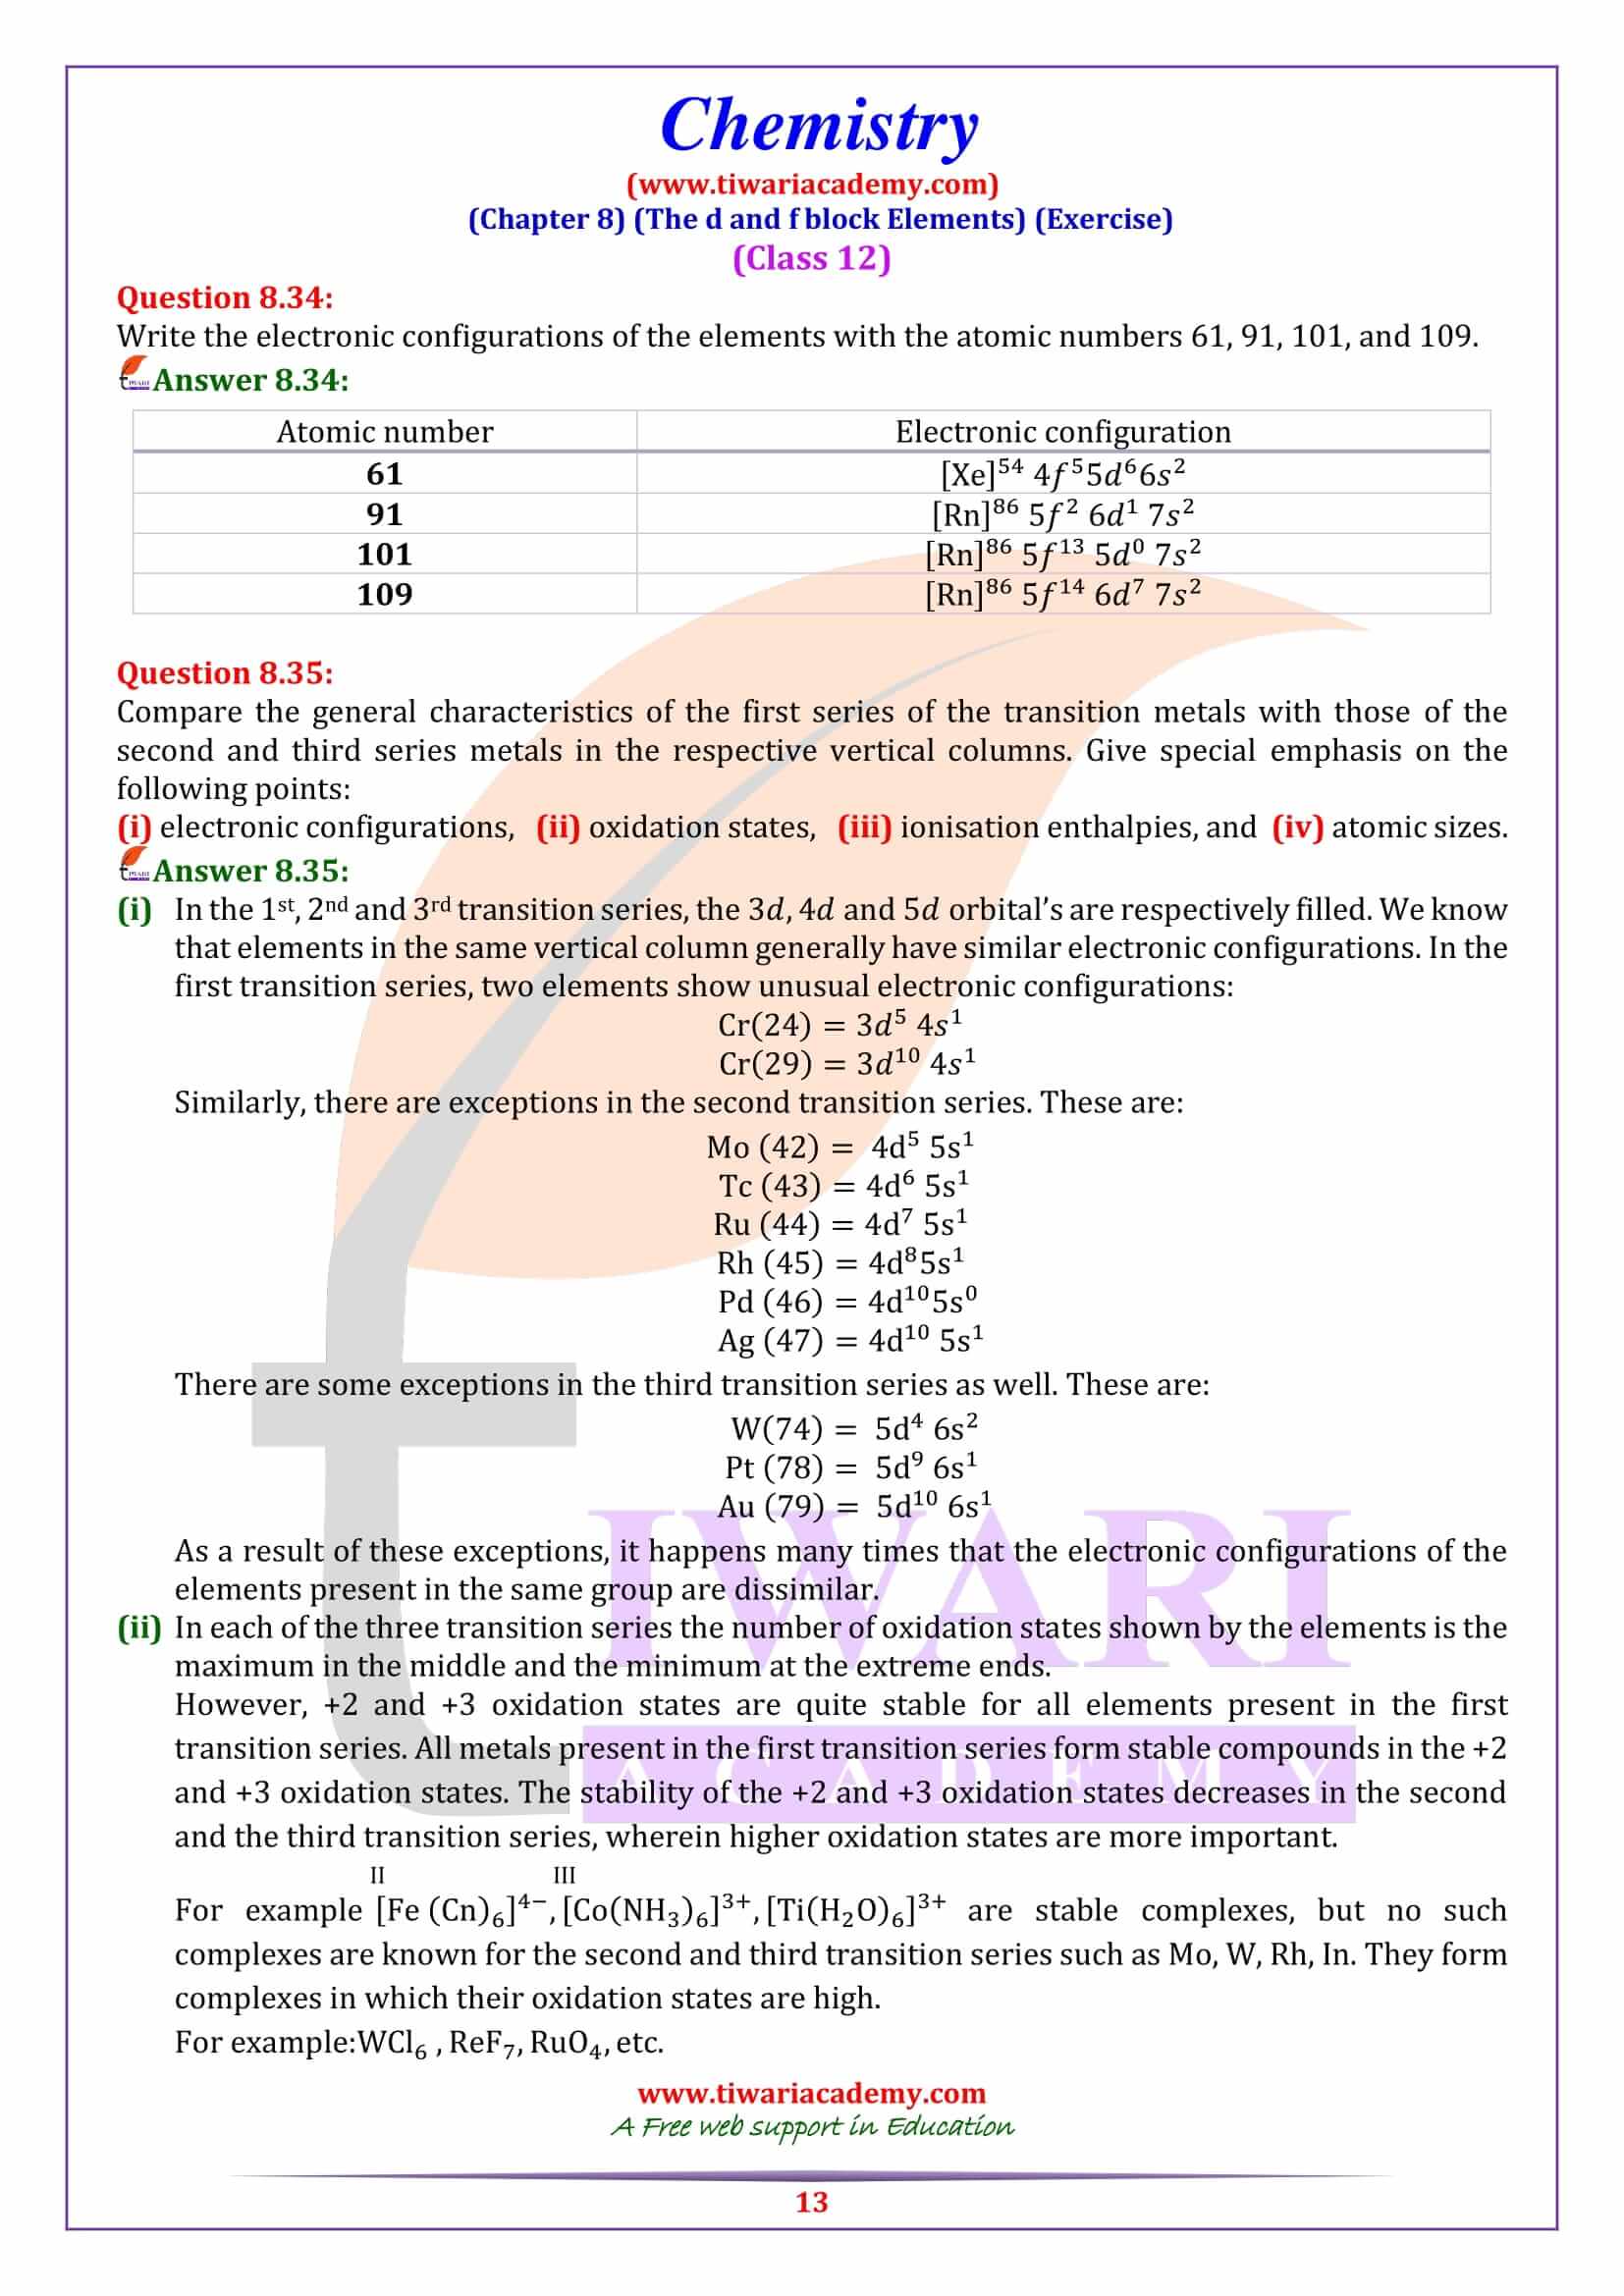 NCERT Solutions for Class 12 Chemistry Chapter 8 textbook answers